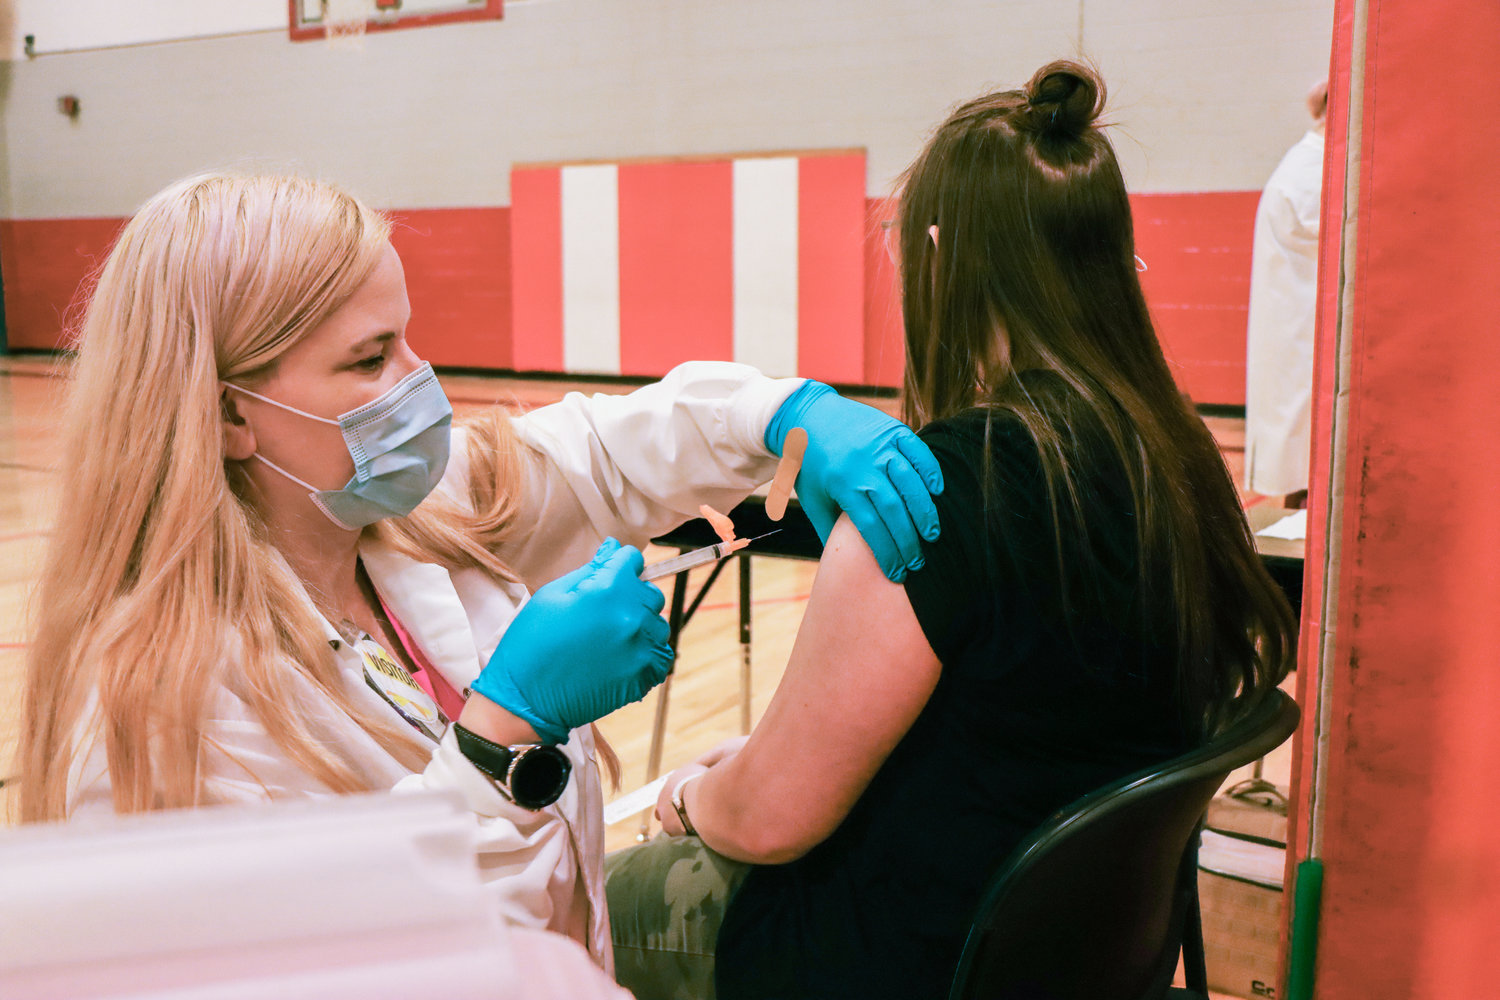 Melissa Clatone, LPM with the Chehalis Tribal Wellness Center, distributes vaccines in an Oakville School Gymnasium Friday morning.